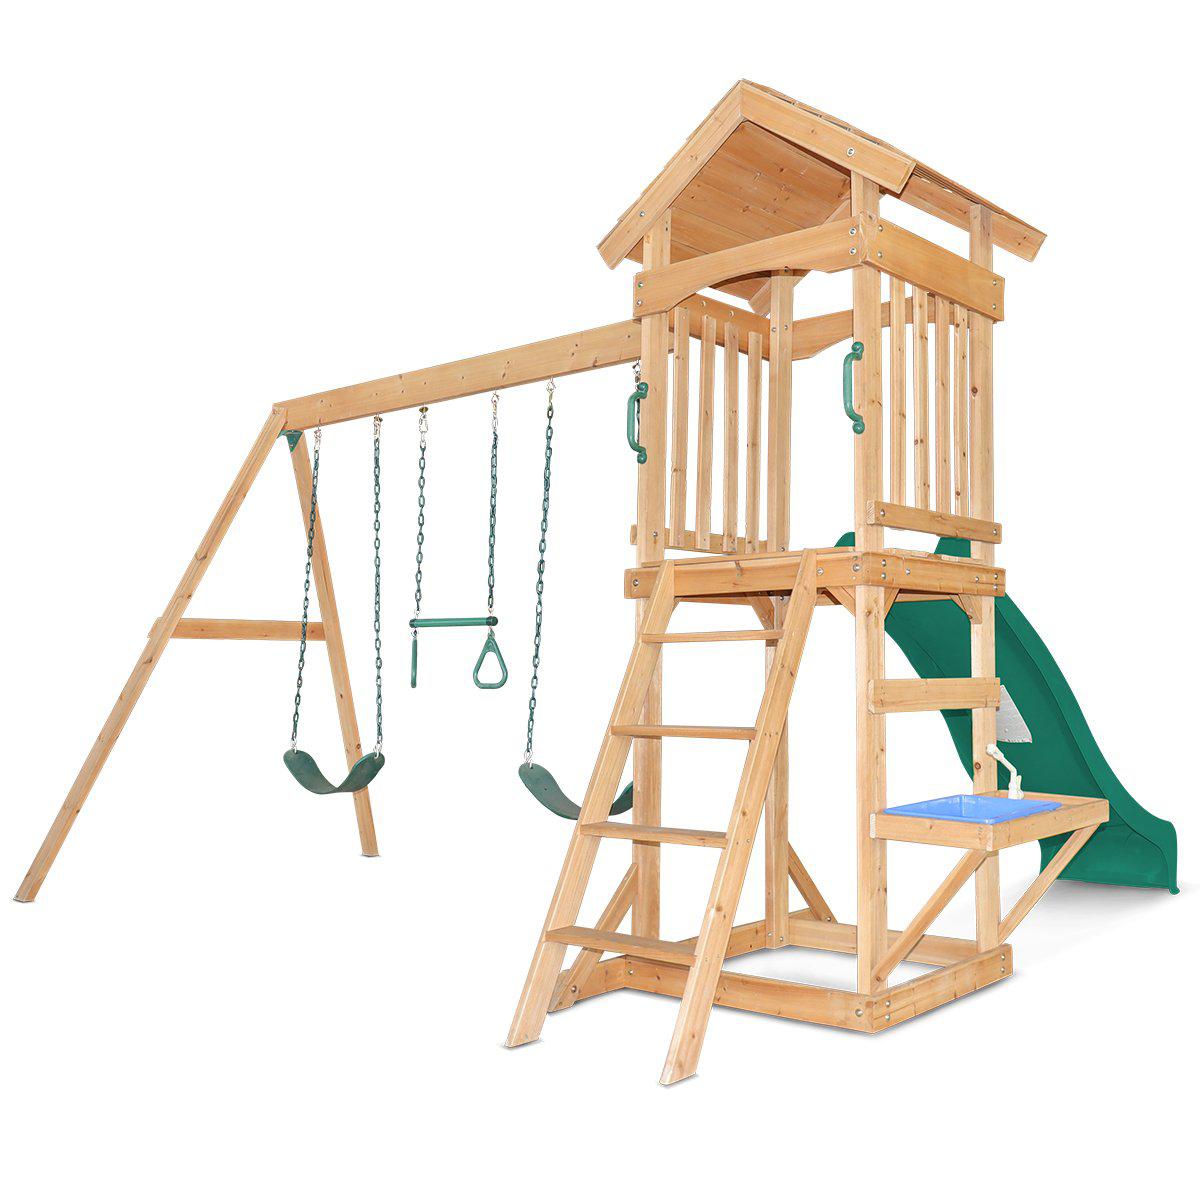 Experience Albert Park Swing Set with Slide: Outdoor Play and Laughter